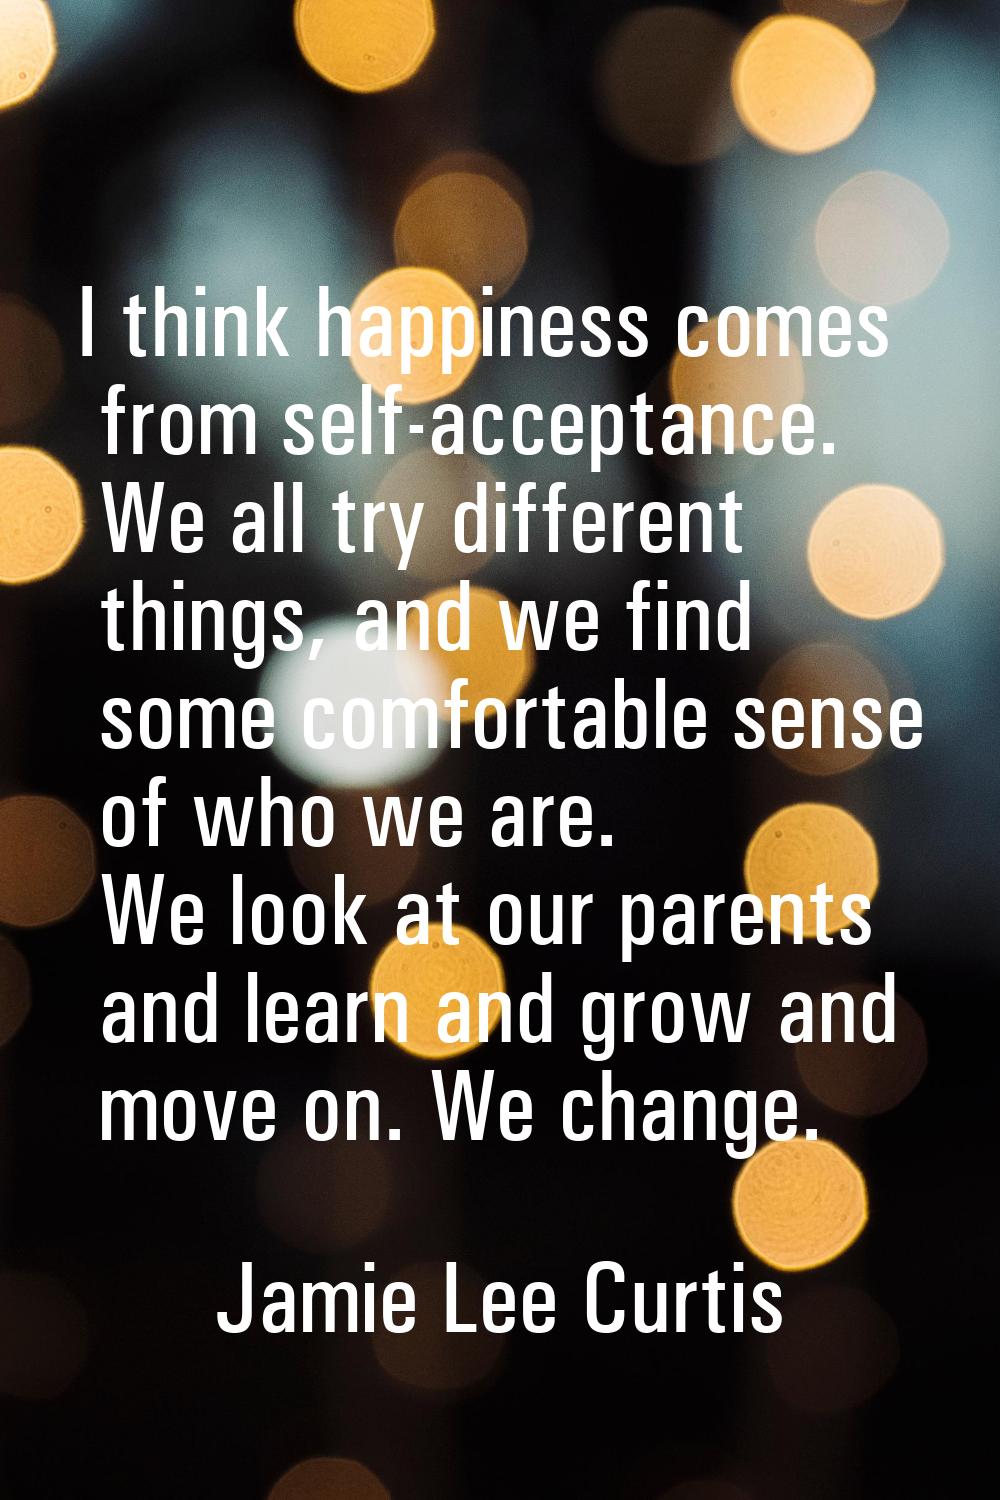 I think happiness comes from self-acceptance. We all try different things, and we find some comfort